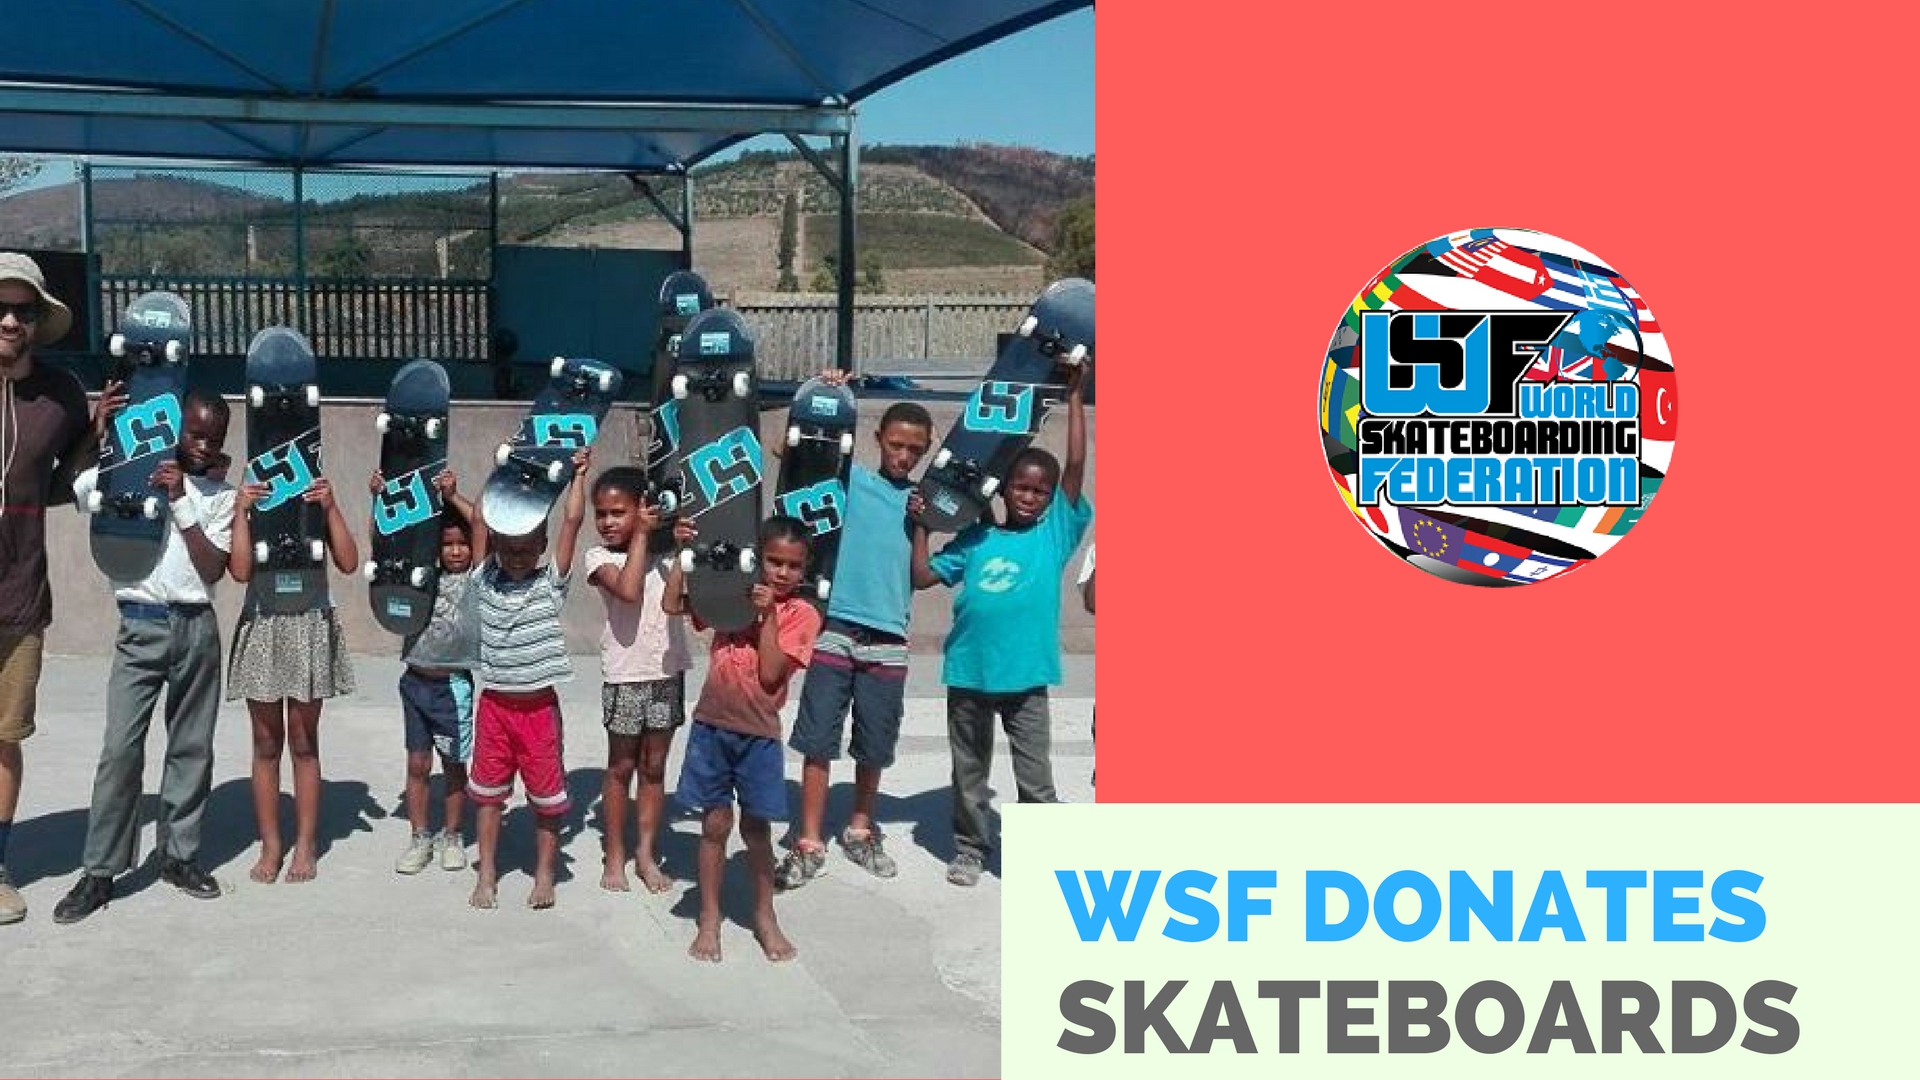 World Skateboarding Federation Donates Decks to South African Youth